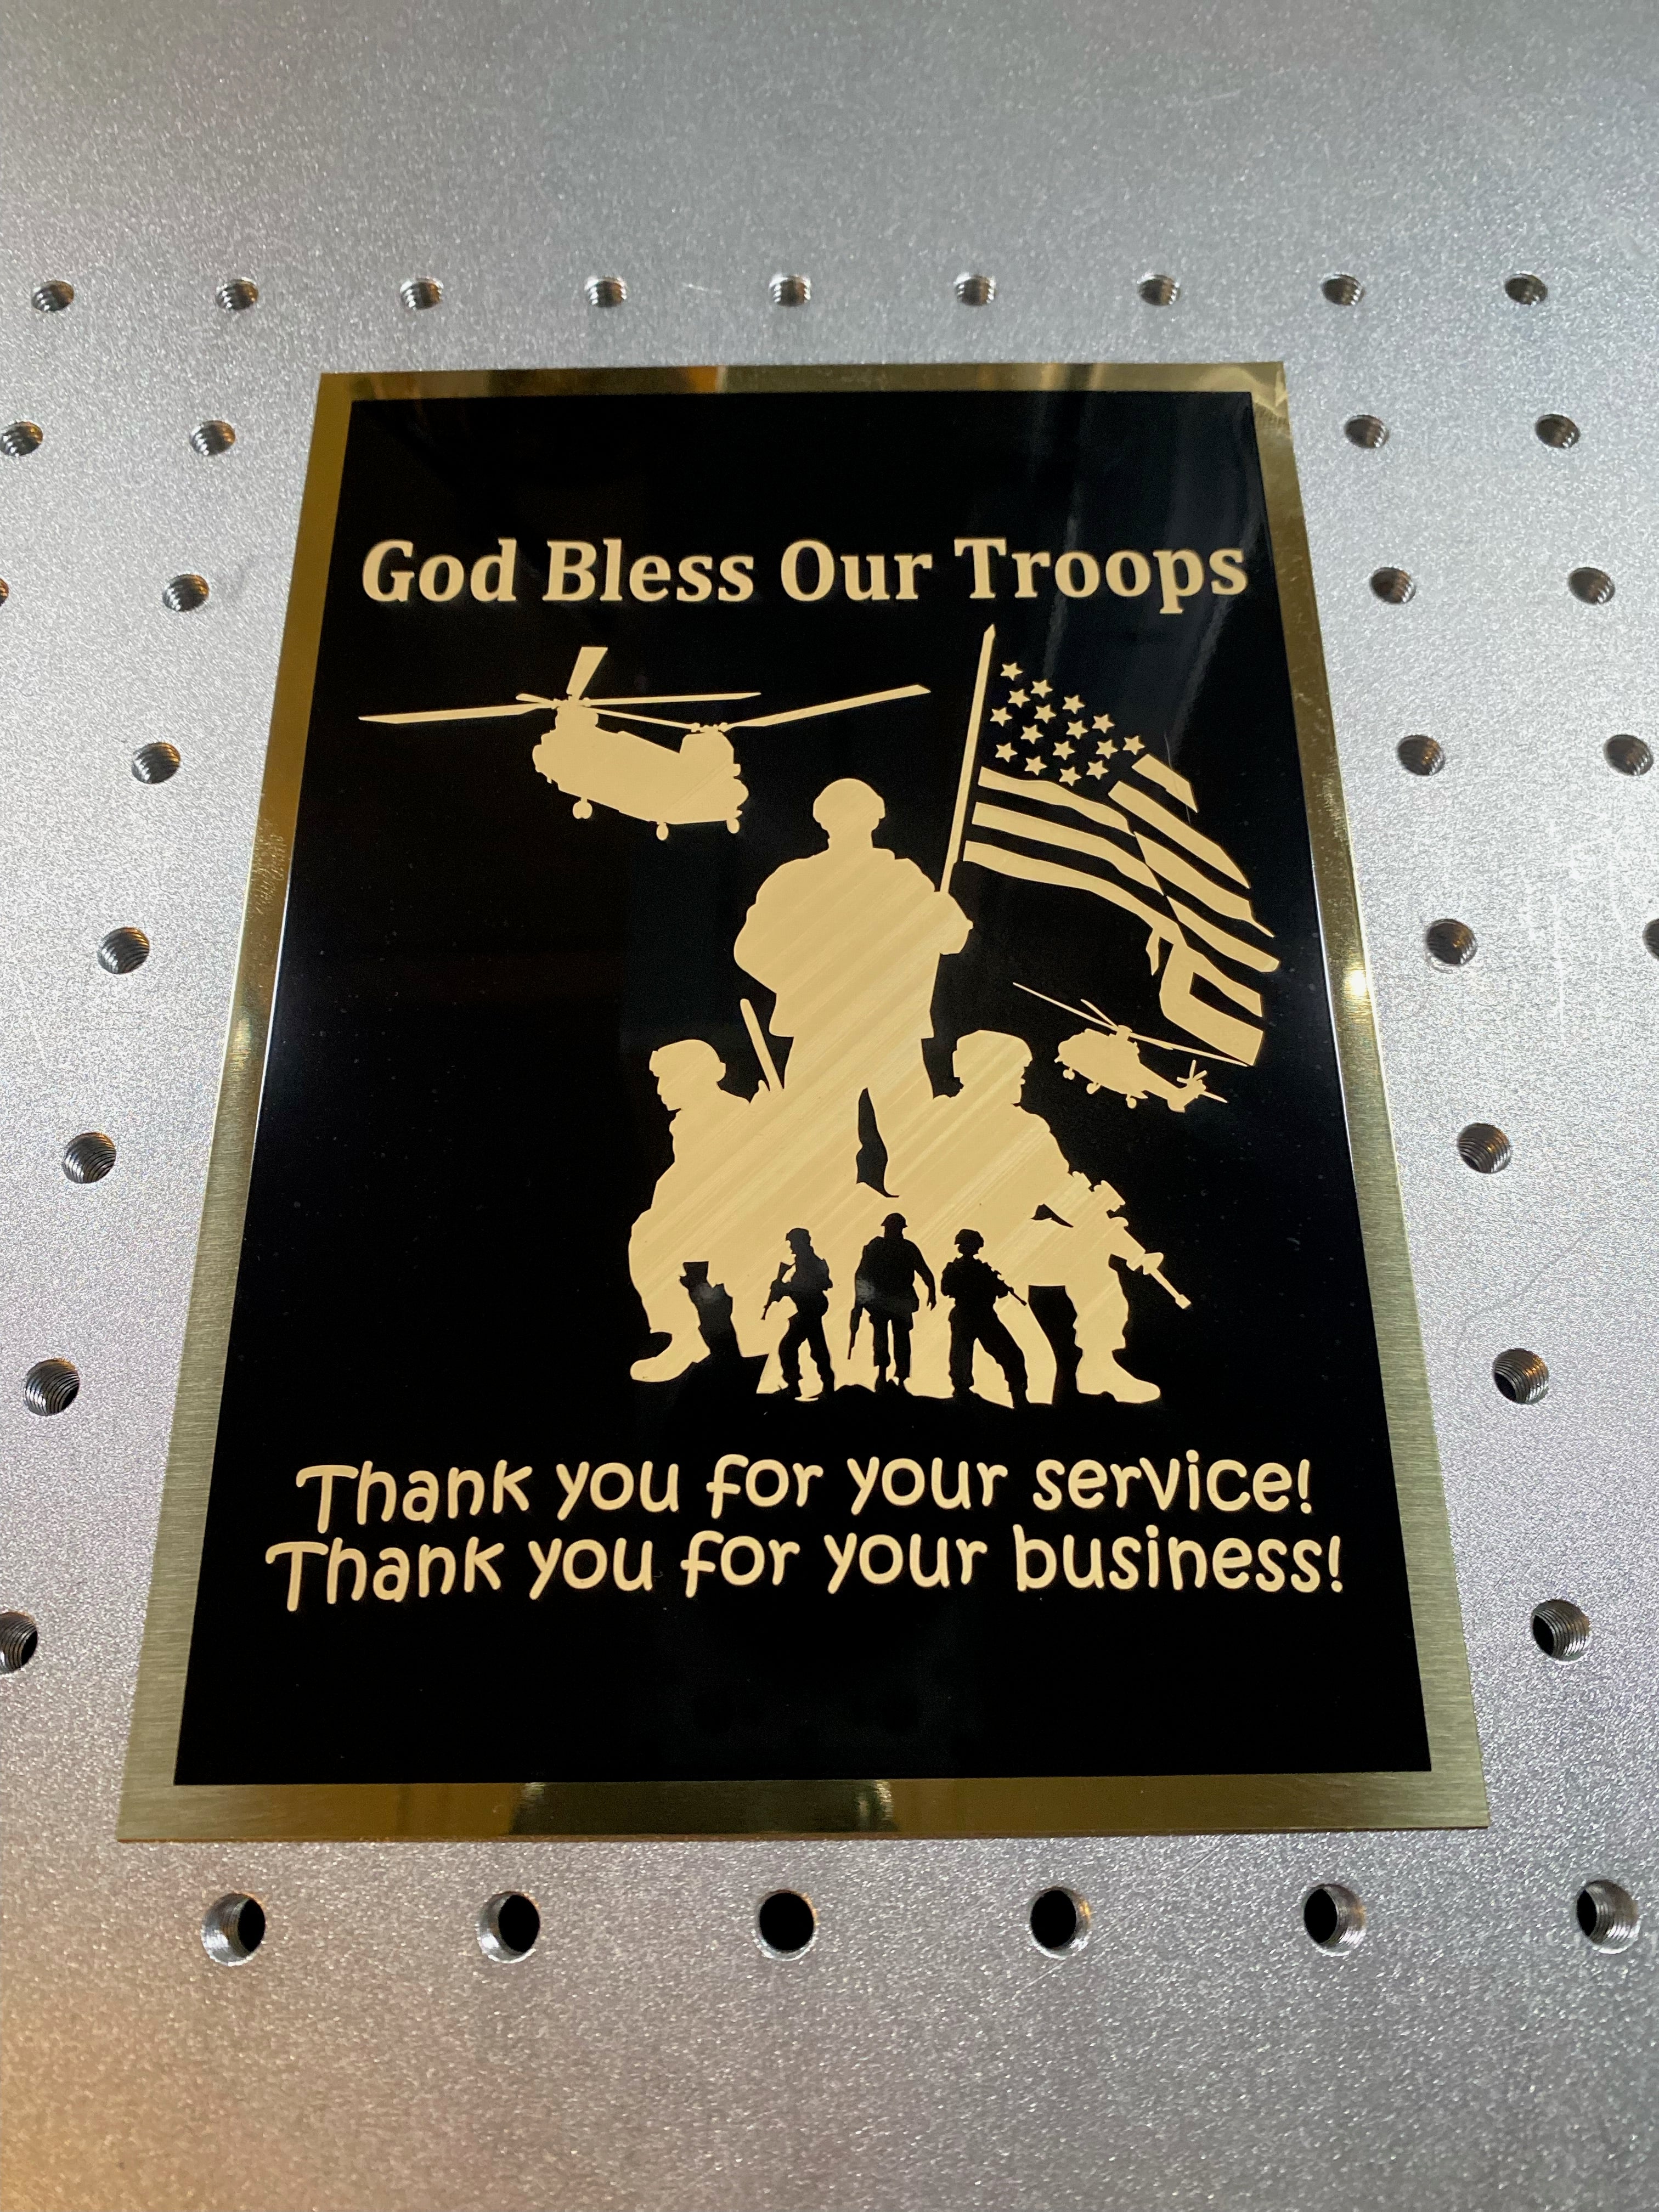 Load video: A video / audio example of a fiber laser engraver etching a patriotic graphic with the words, &quot;God bless our troops.&quot; The bottom reads, &quot;Thank you for your service! Thank you for your business!&quot;